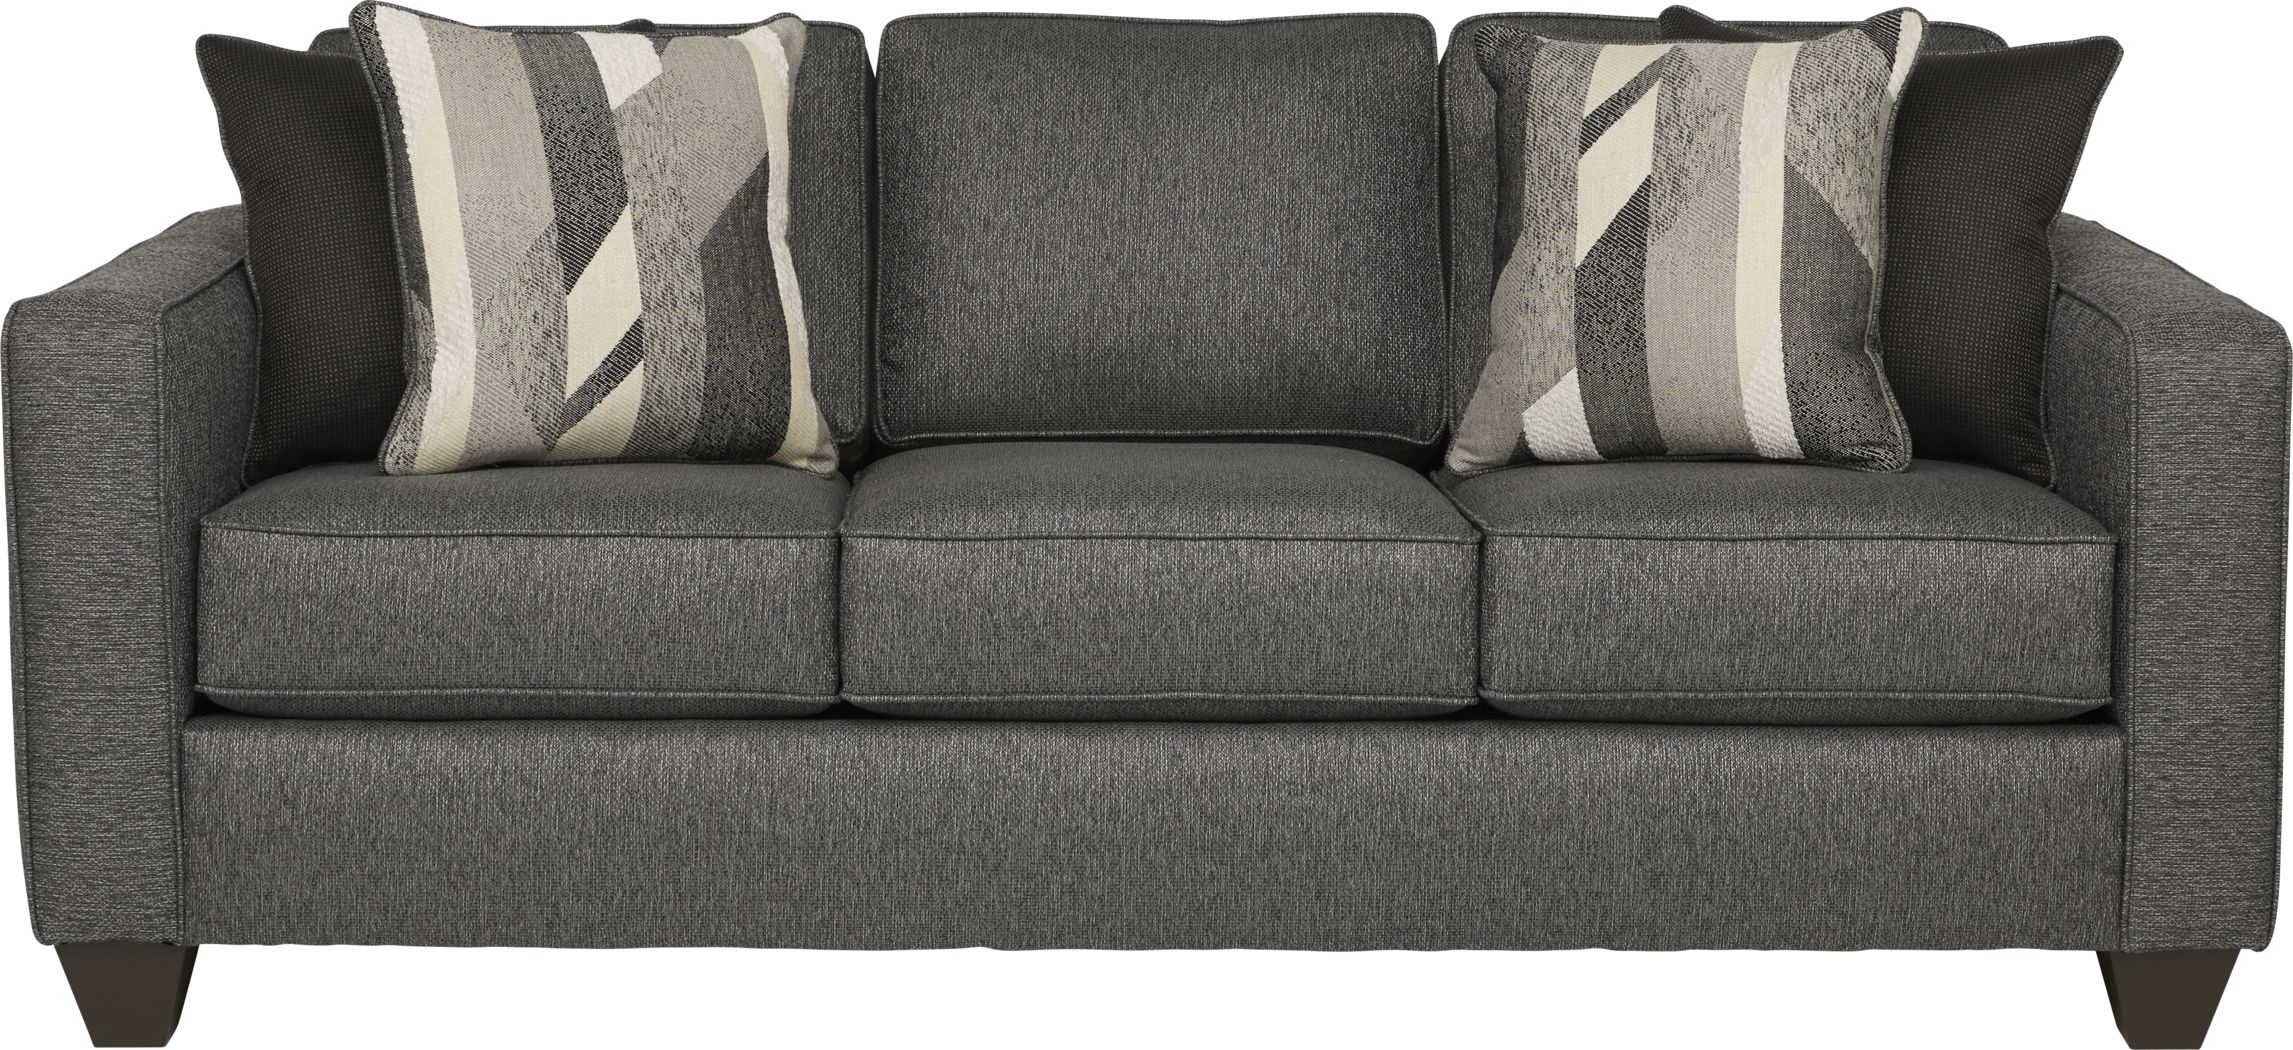 Gray Sleeper Sofa Beds Pull Out Couches